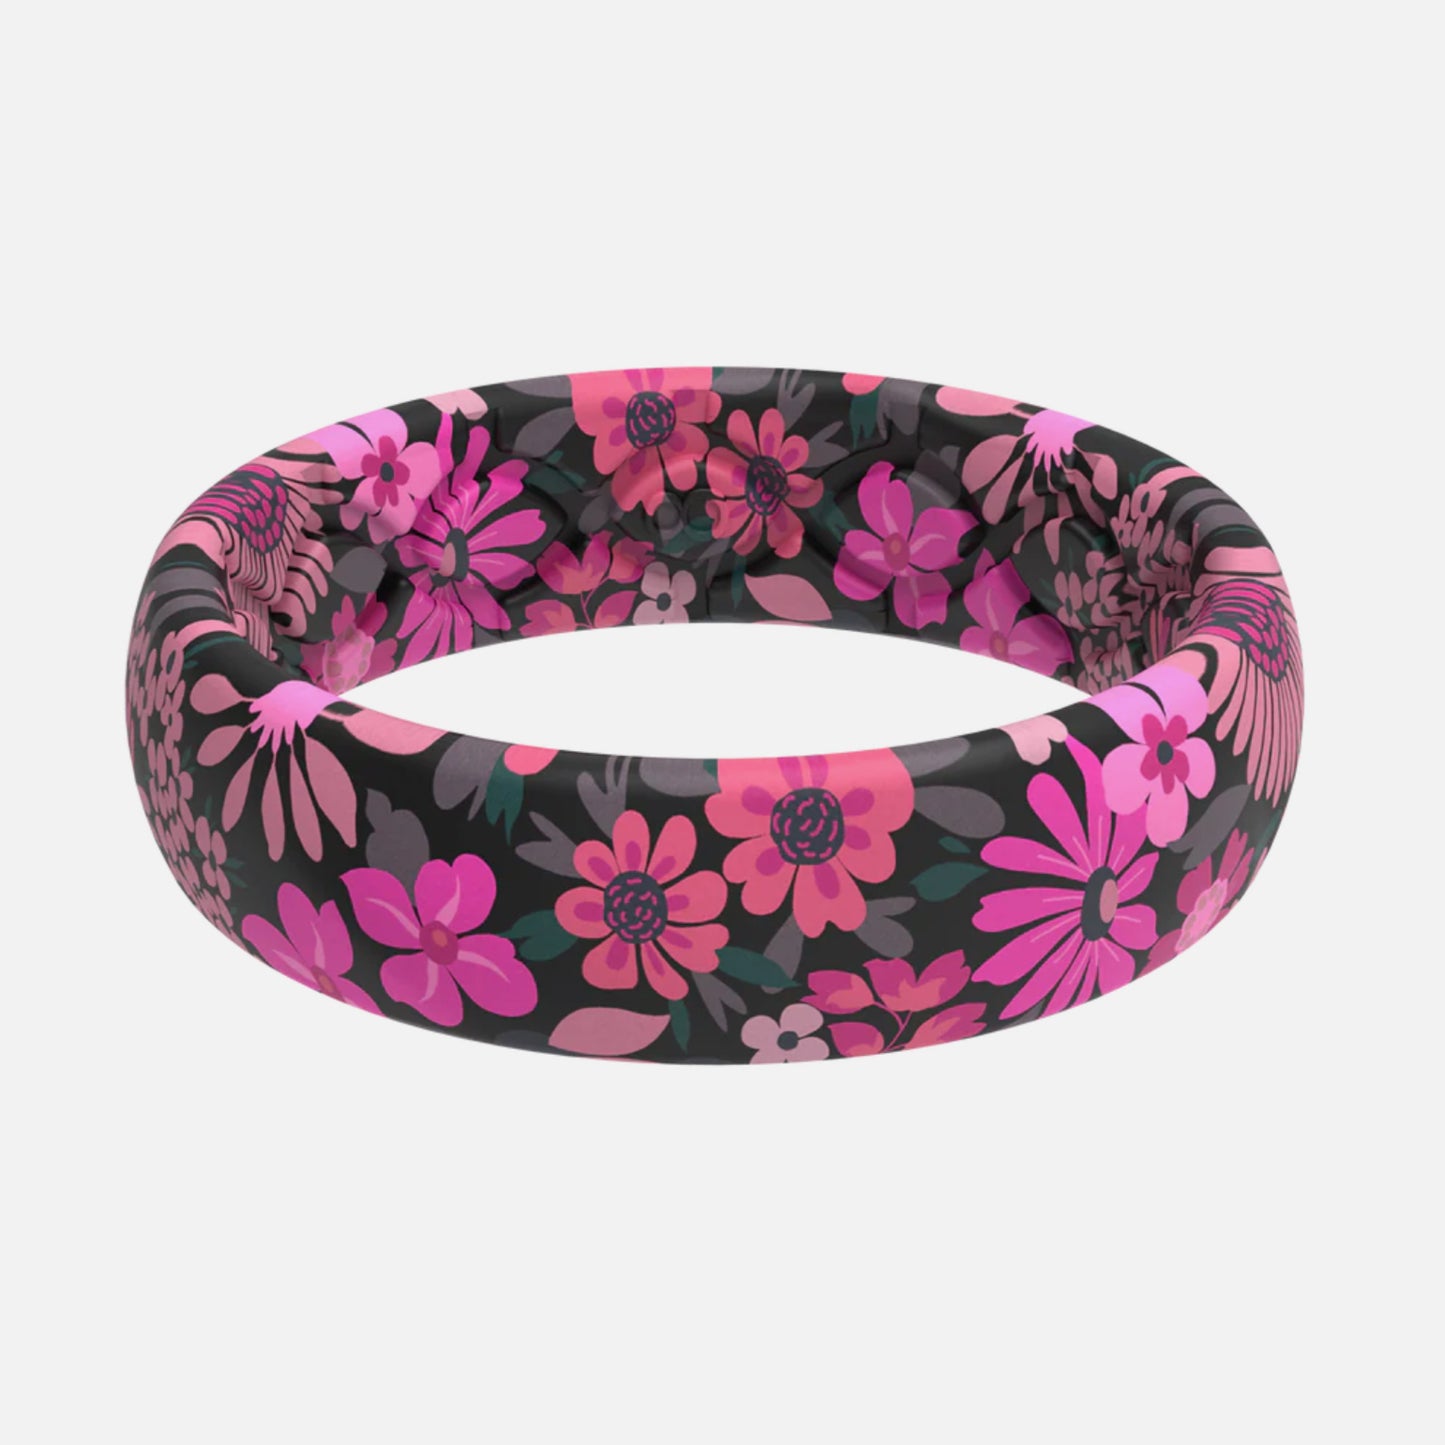 Groove life women’s pink floral silicon ring